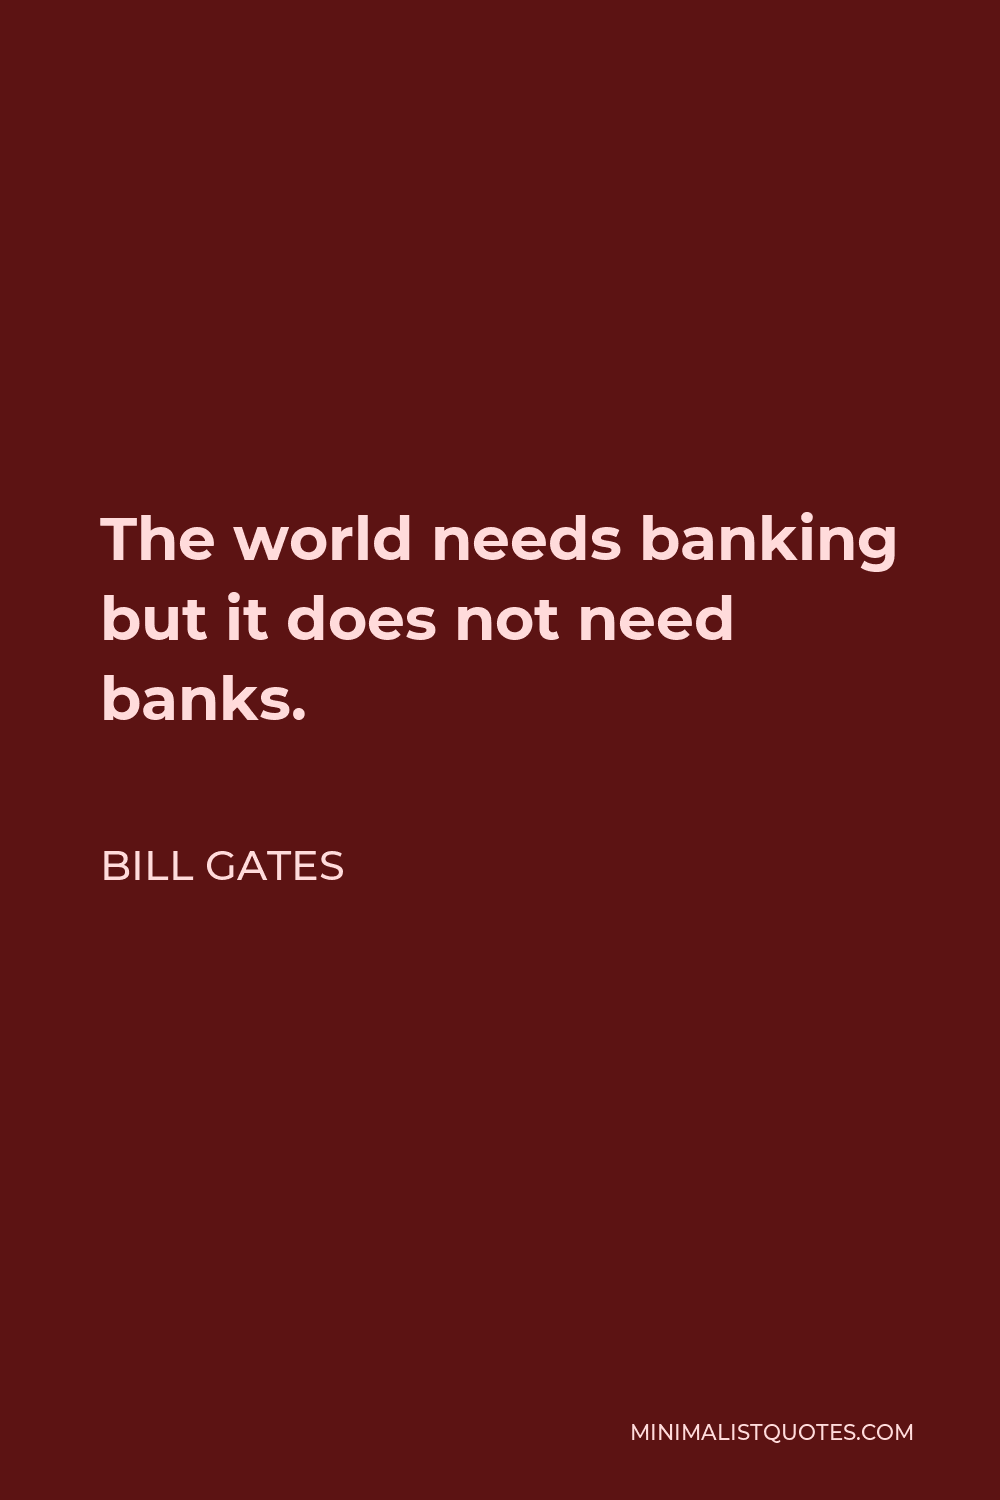 Bill Gates Quote - The world needs banking but it does not need banks.